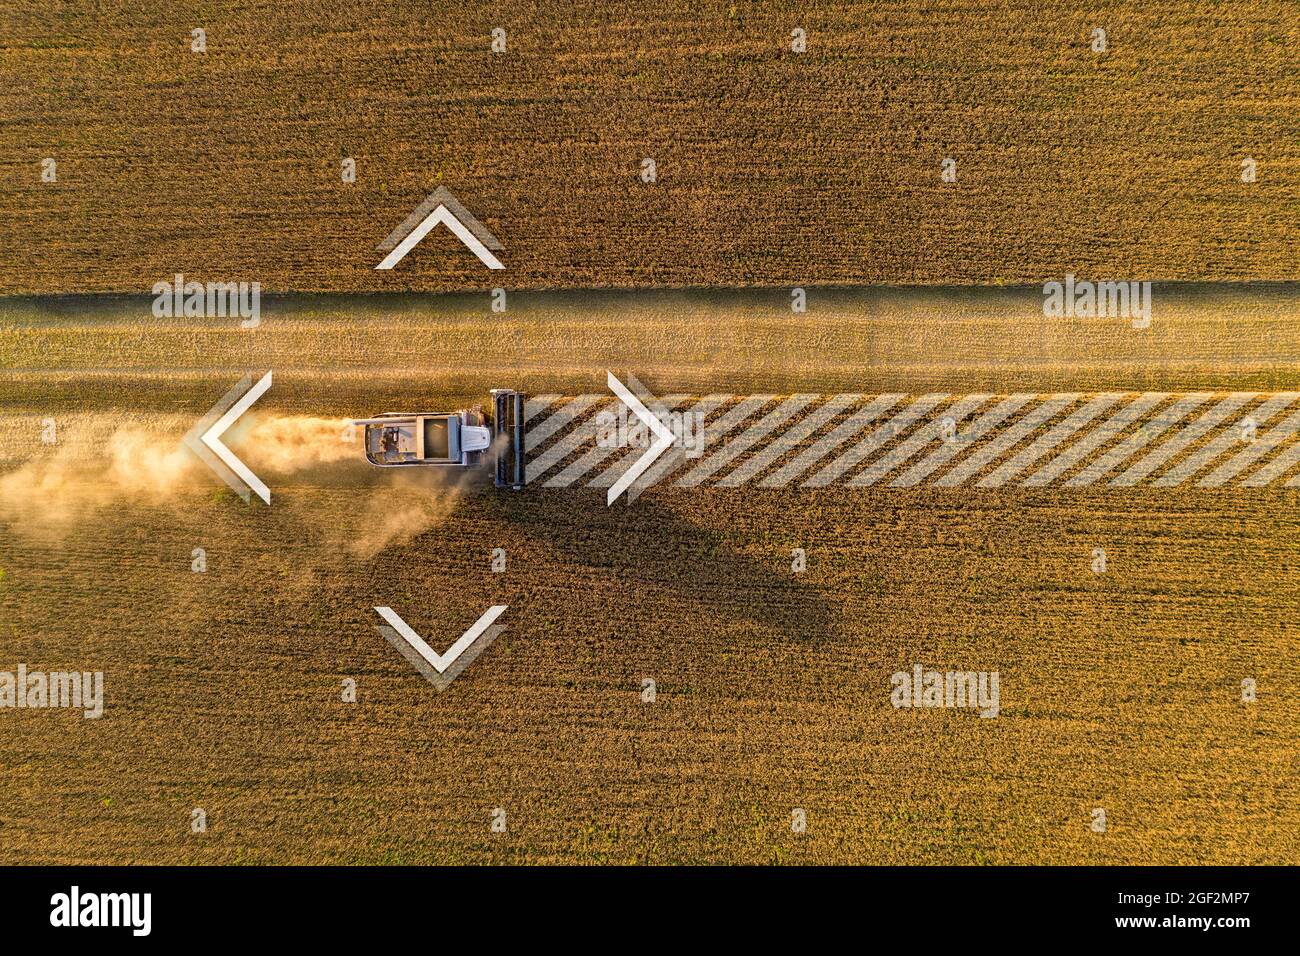 Autonomous harvester on the field. Digital transformation in agriculture  Stock Photo